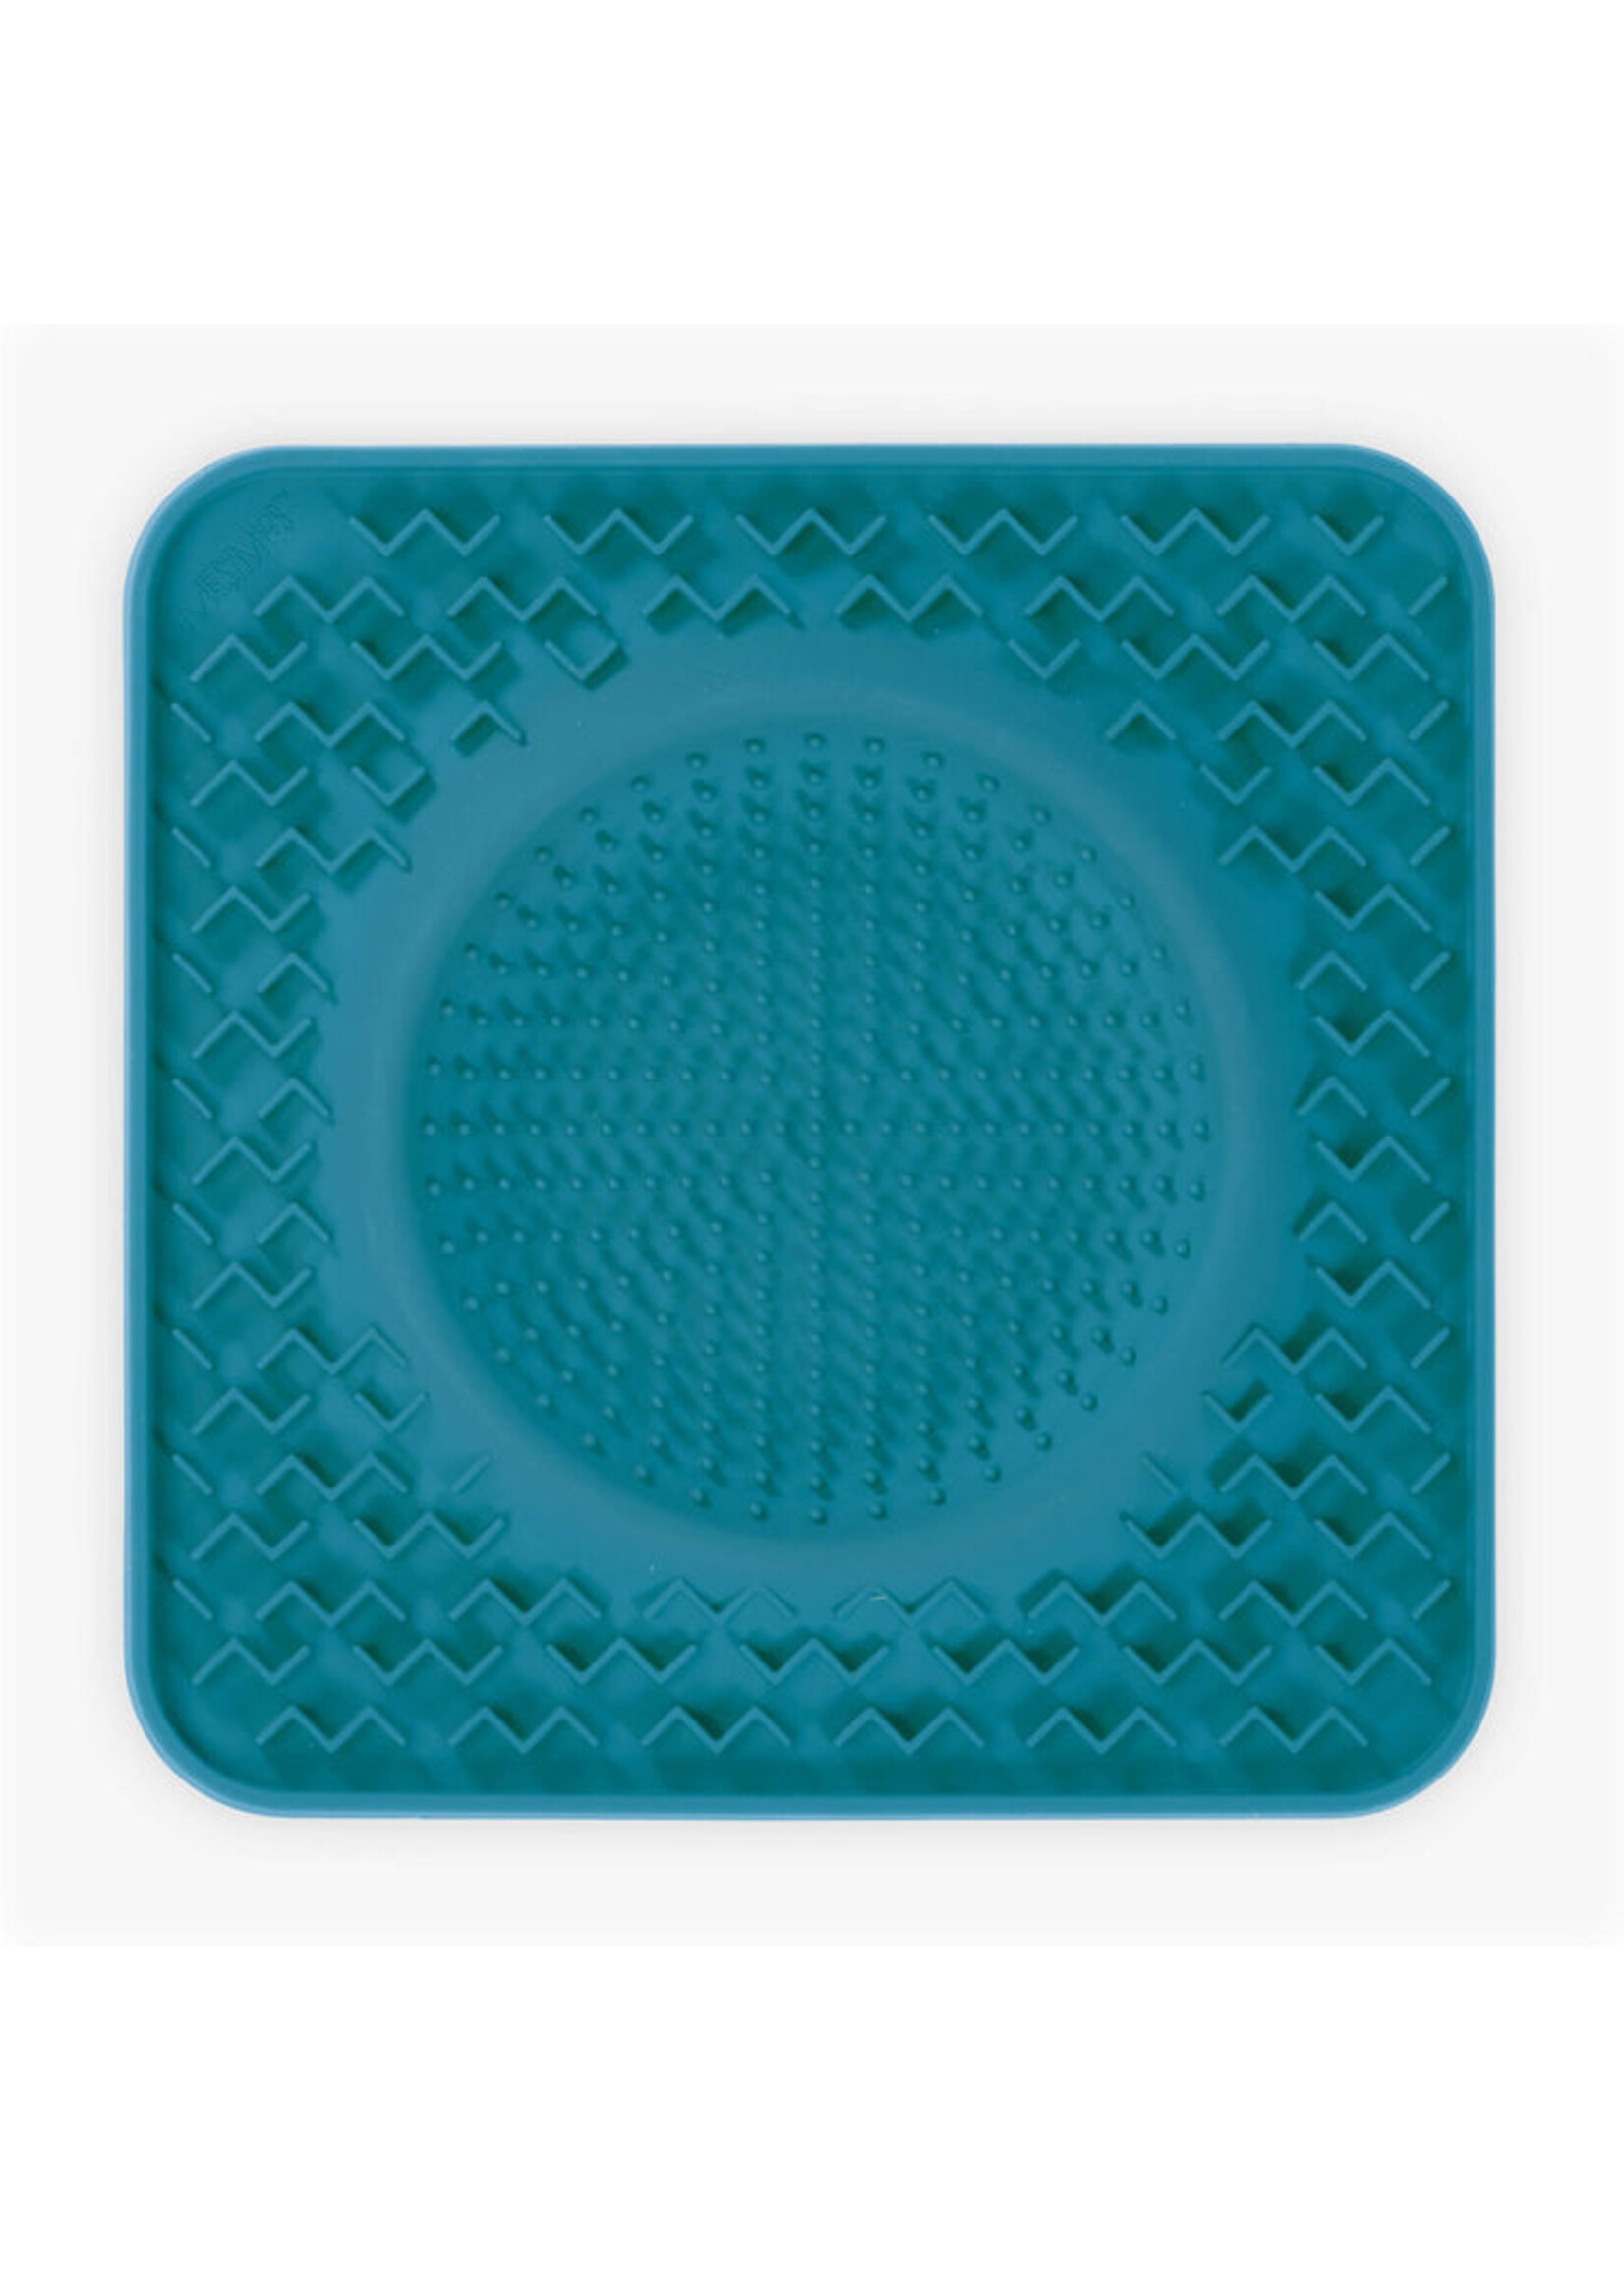 Messy Mutts Messy Mutts Silicone Therapeutic Licking Bowl Mat